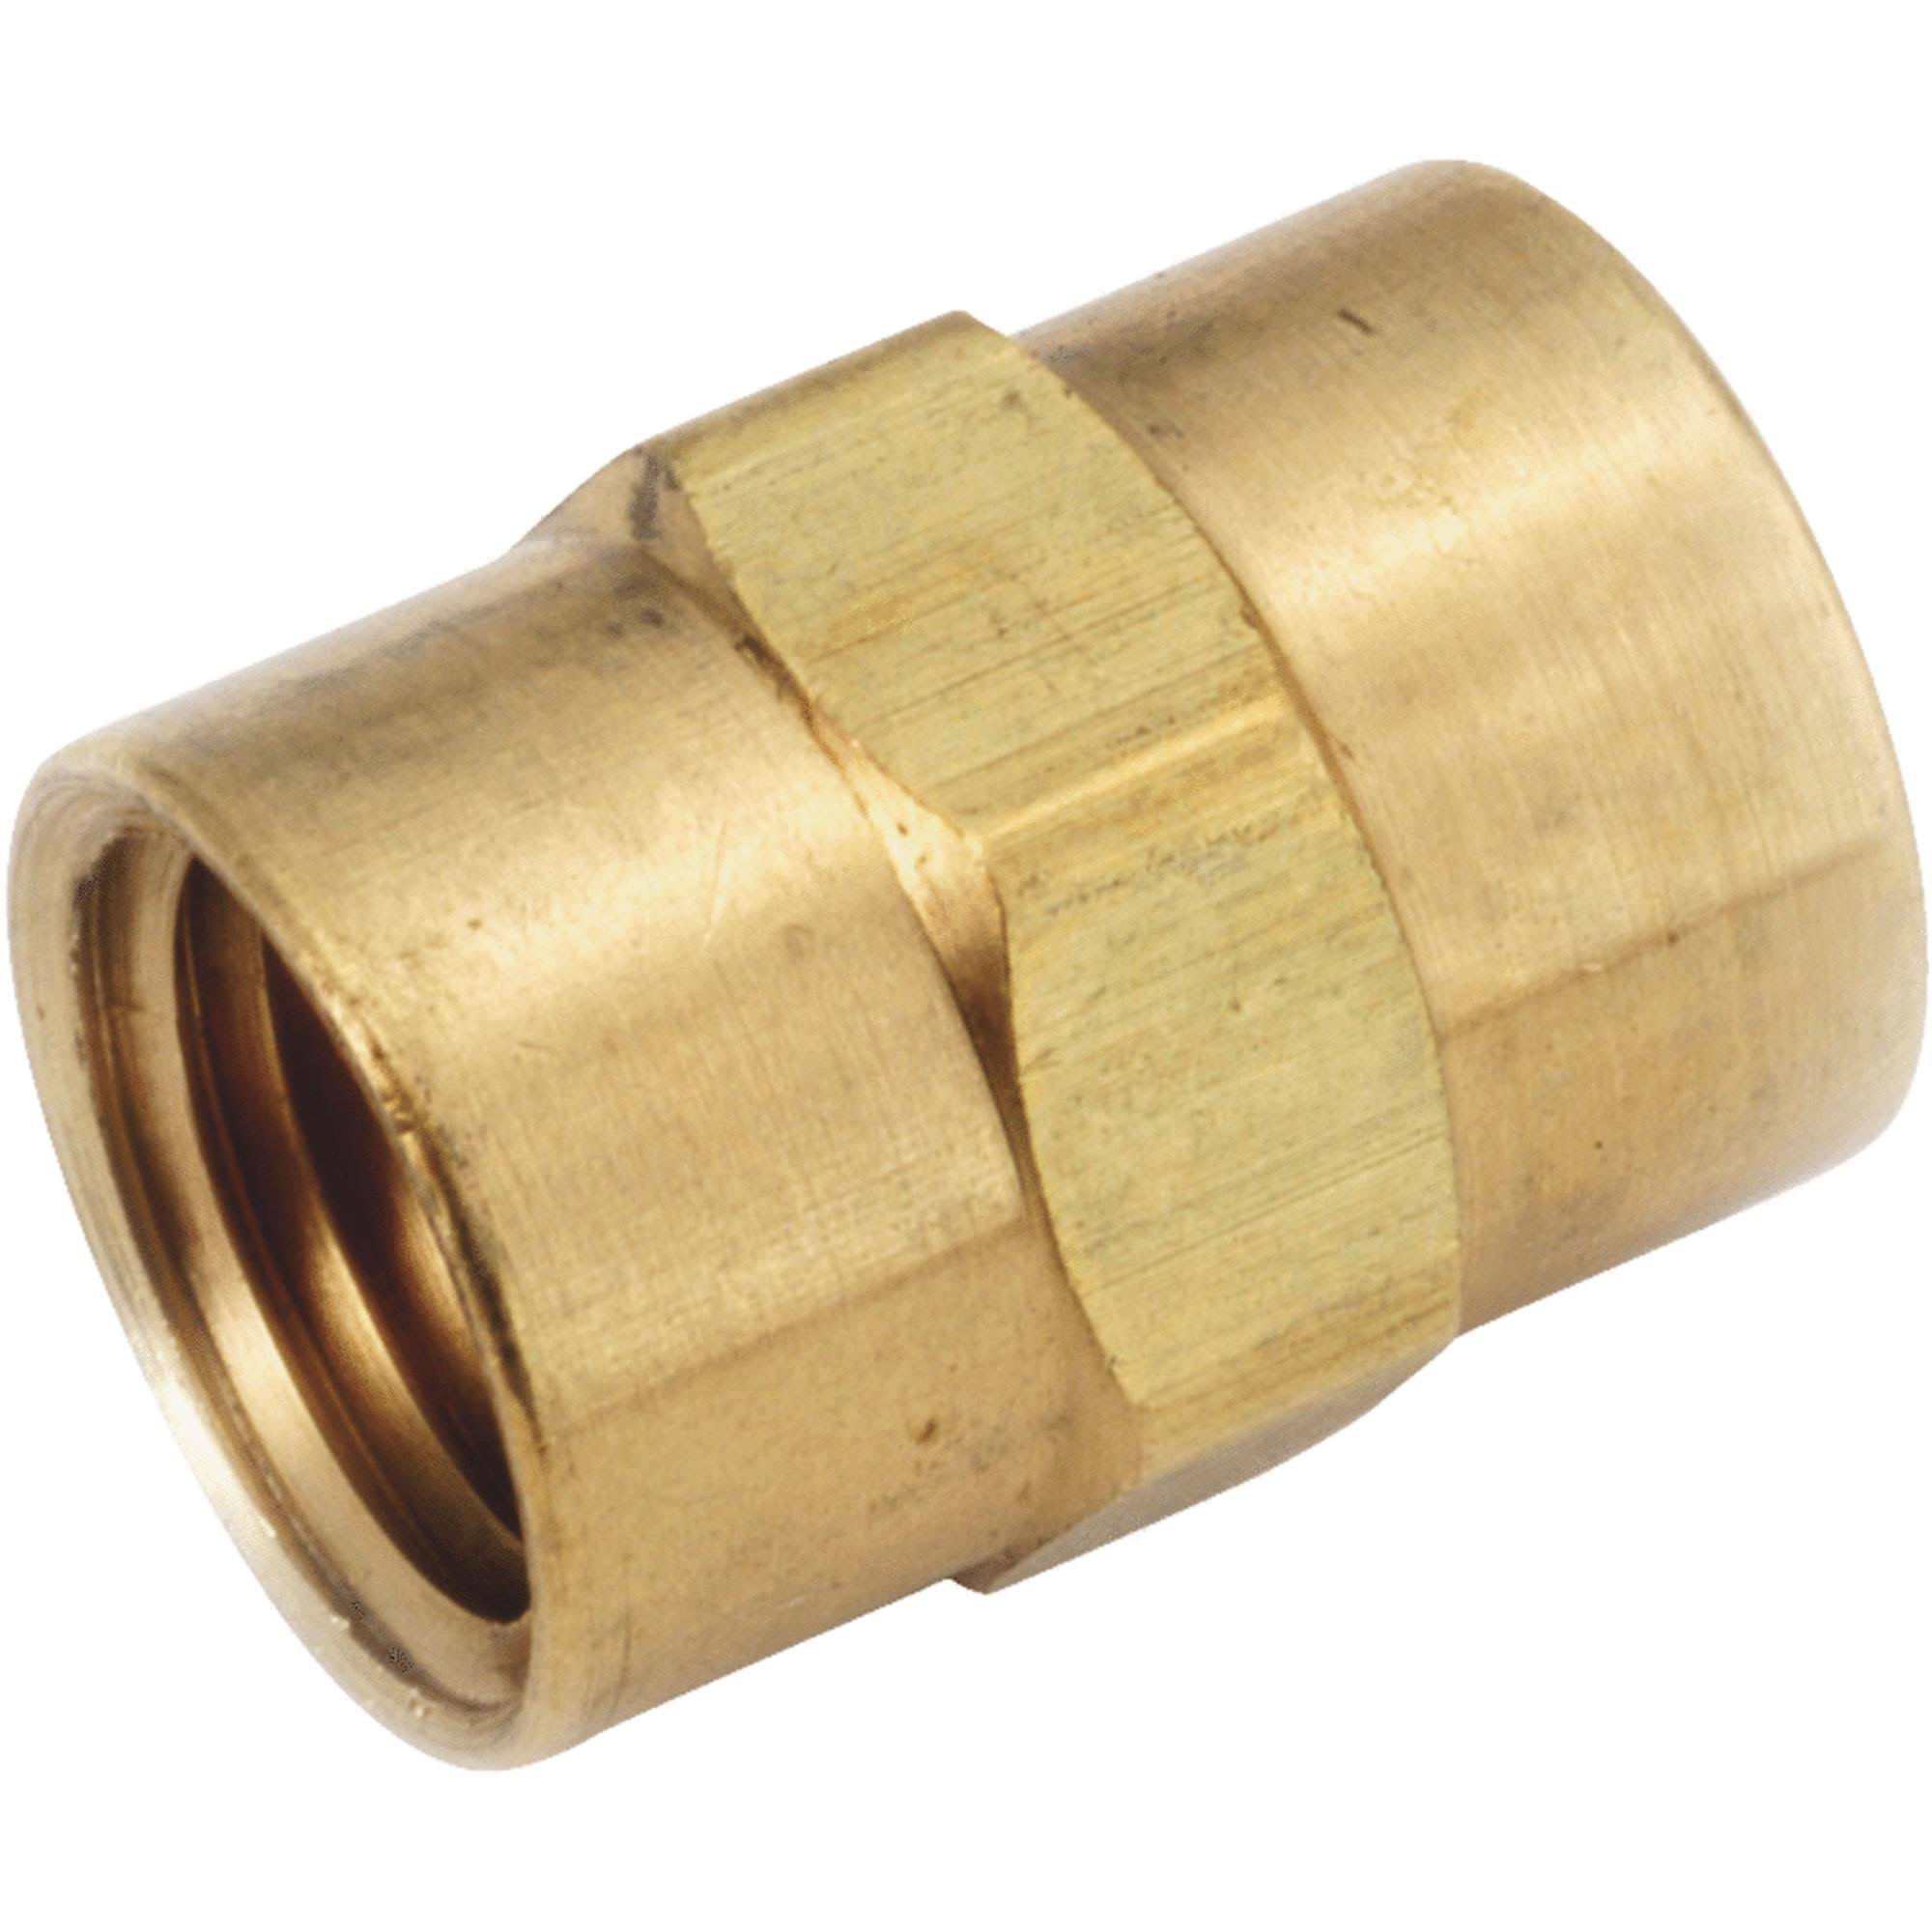 Anderson Metals 756103-06 Low Lead Pipe Coupling - Brass, 3/8"